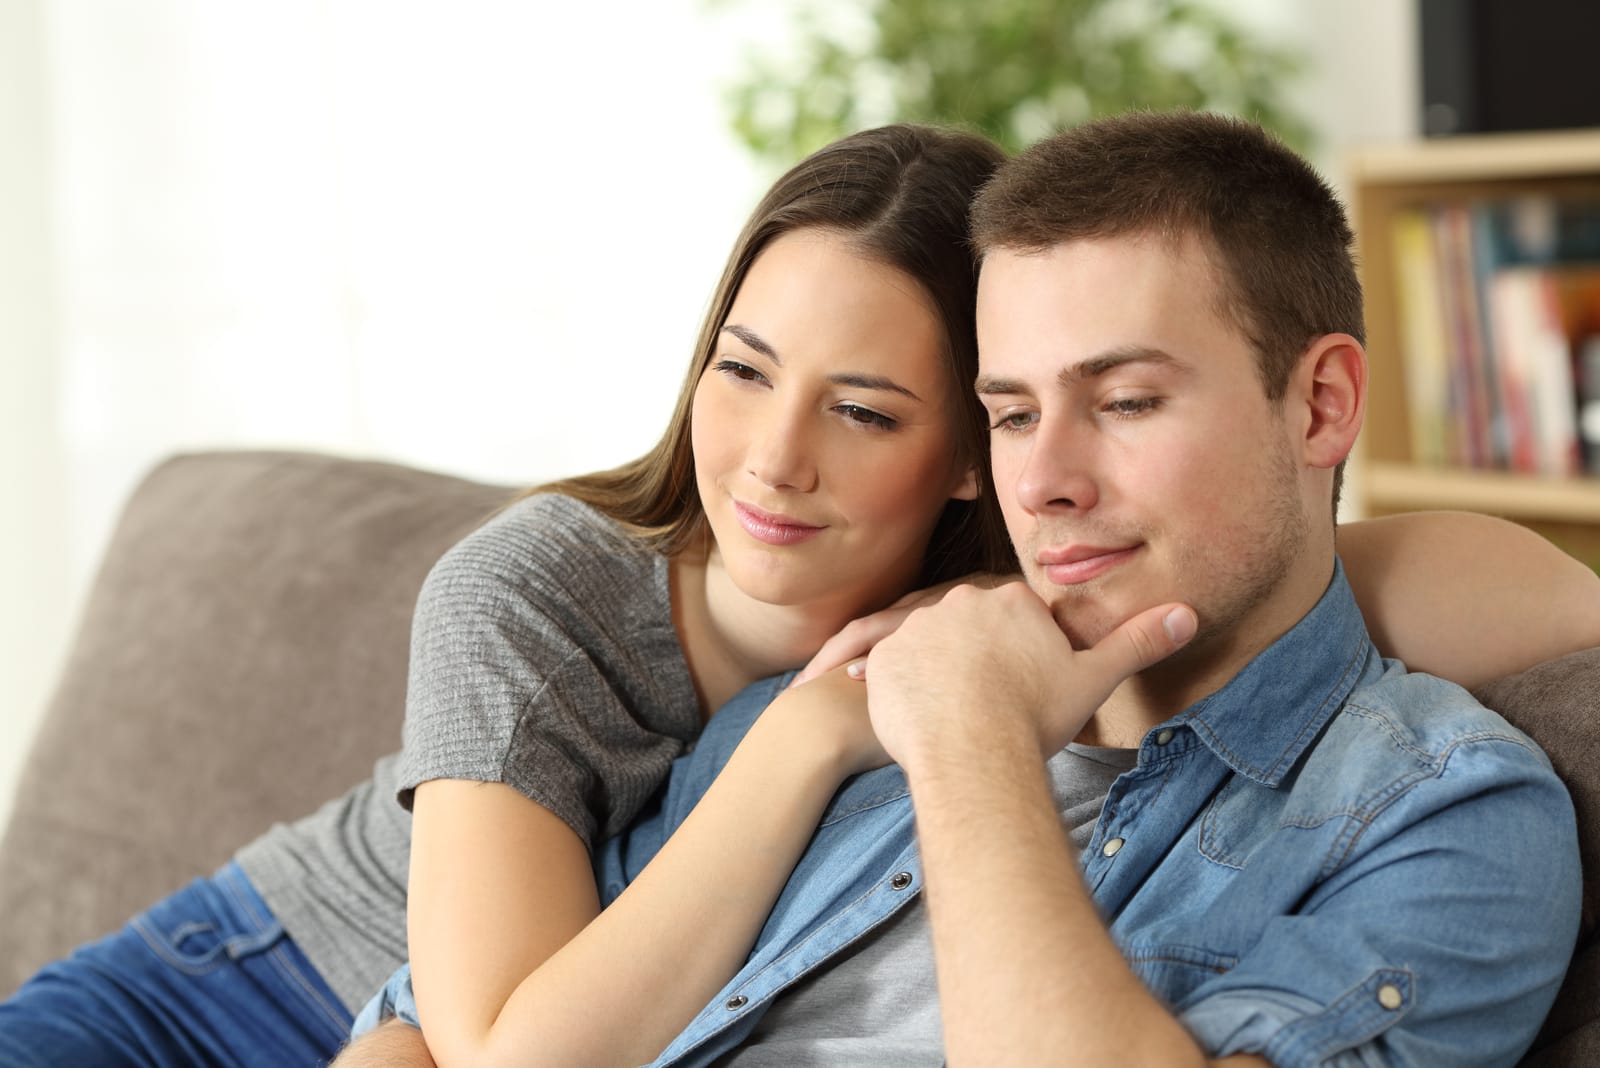 Are You An ‘Emotional Caretaker’ In Your Relationship?